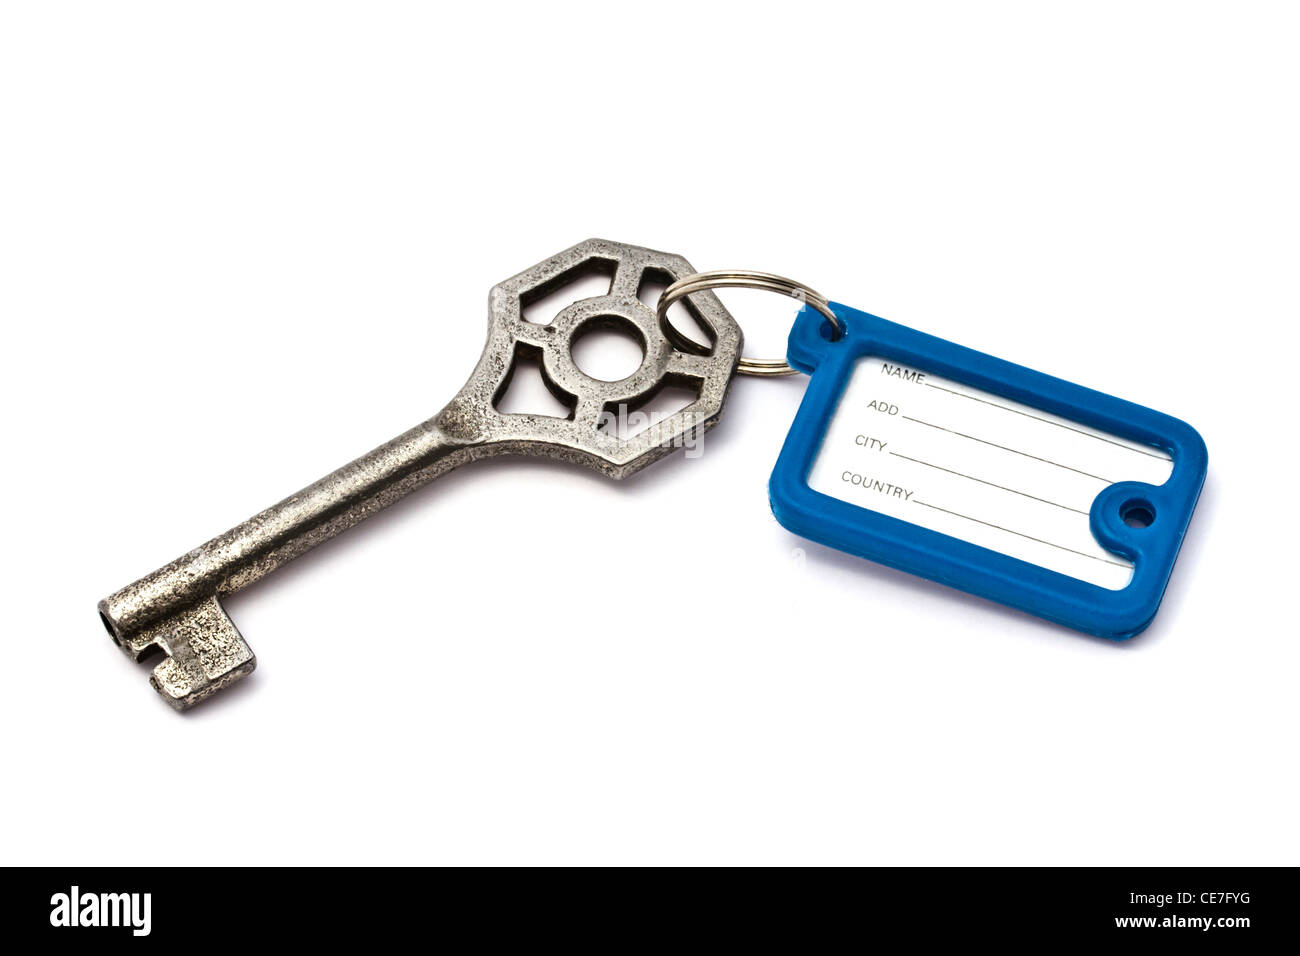 Blank tag and old key isolated on white background Stock Photo